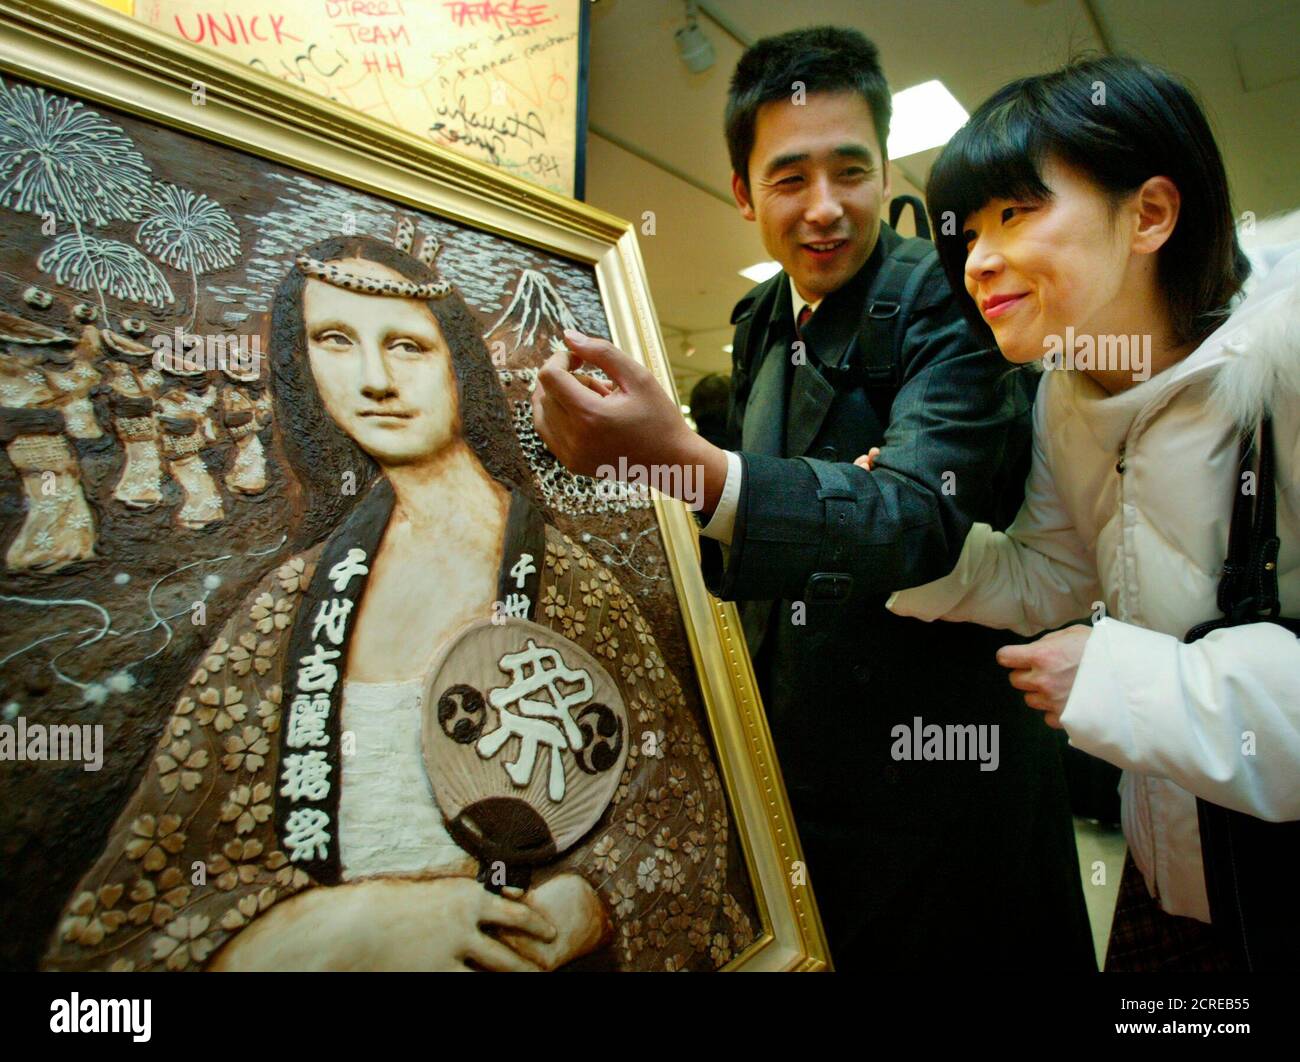 A Japanese couple looks at a 'Mona Lisa' painting made from chocolate on display at Salon du Chocolat in Tokyo January 29, 2004. The creation, made by Japanese chocolate maker Madamu Setsuko, is 77 cm (30.3 inches) in height and 53 cm (20.8 inches) in length and uses 13 kg (28 lb) of chocolate. Picture taken January 29. REUTERS/Haruyoshi Yamaguchi  YN Stock Photo